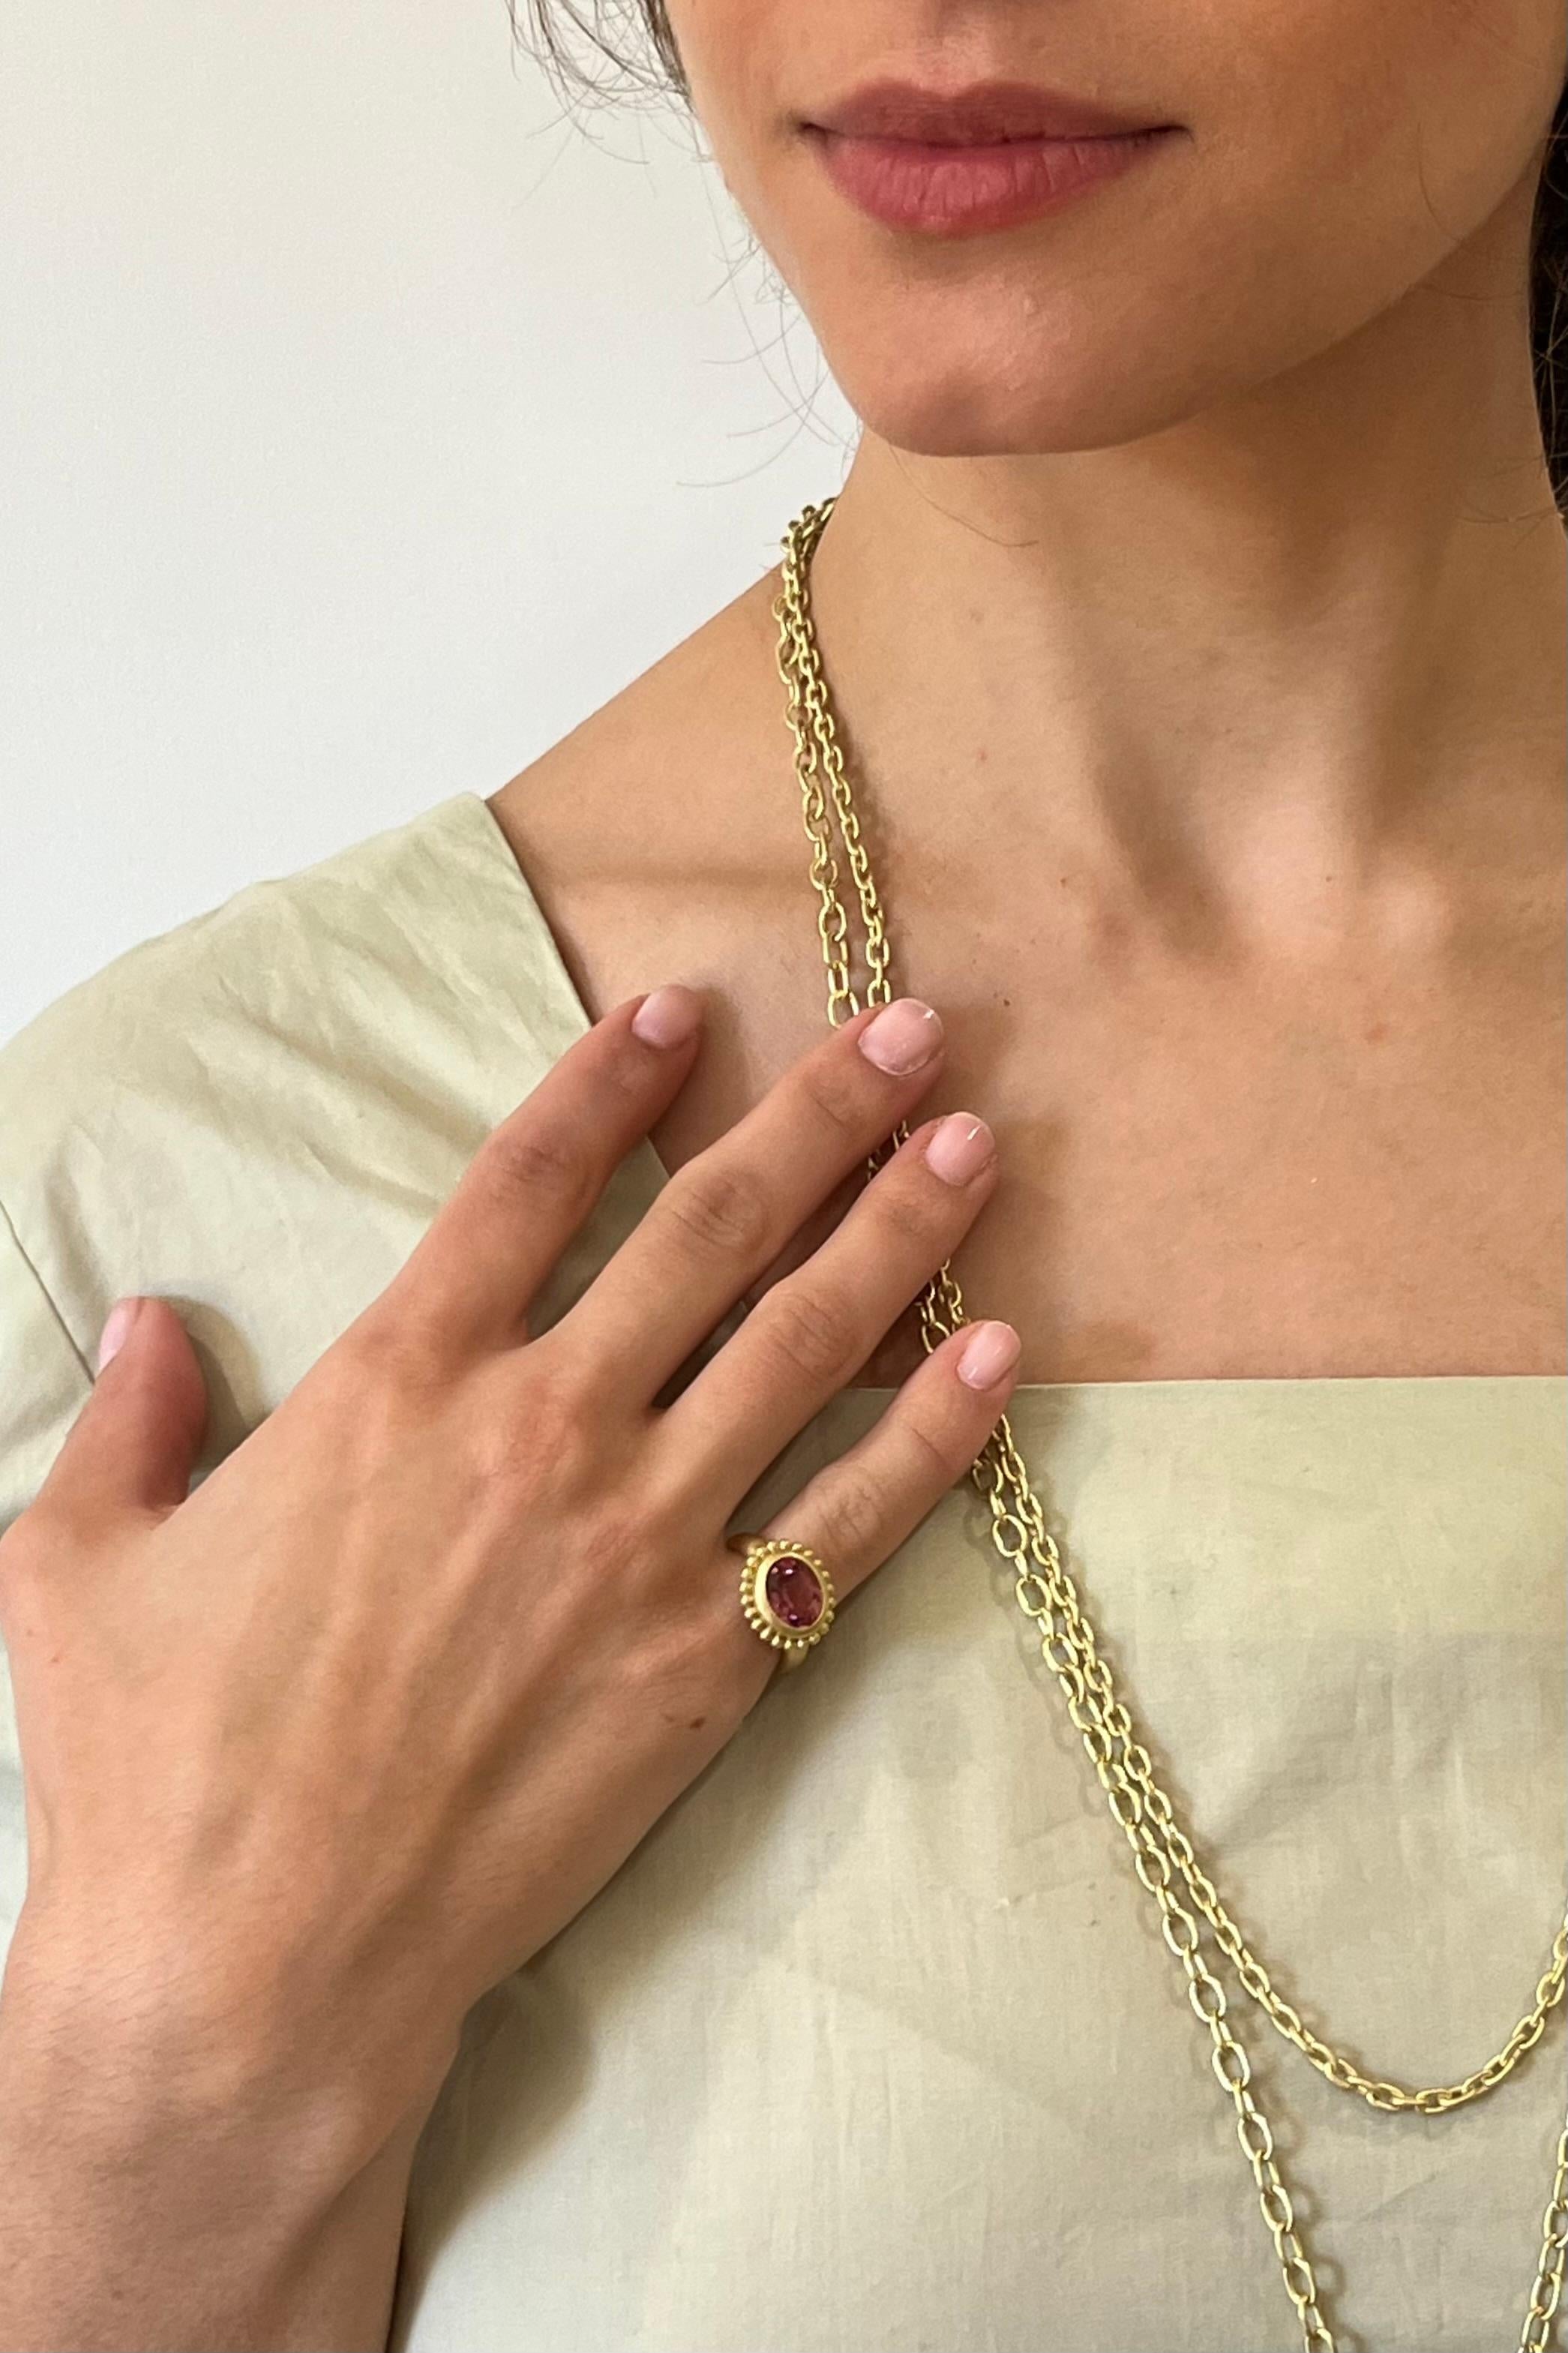 Classic and versatile, Faye Kim's 18 Karat Gold Heavy, Small Oval Link Chain, handmade with a matte finish, is a must-have for every jewelry wardrobe. This beautiful piece has heft and can be worn alone or as a layering piece with other chains